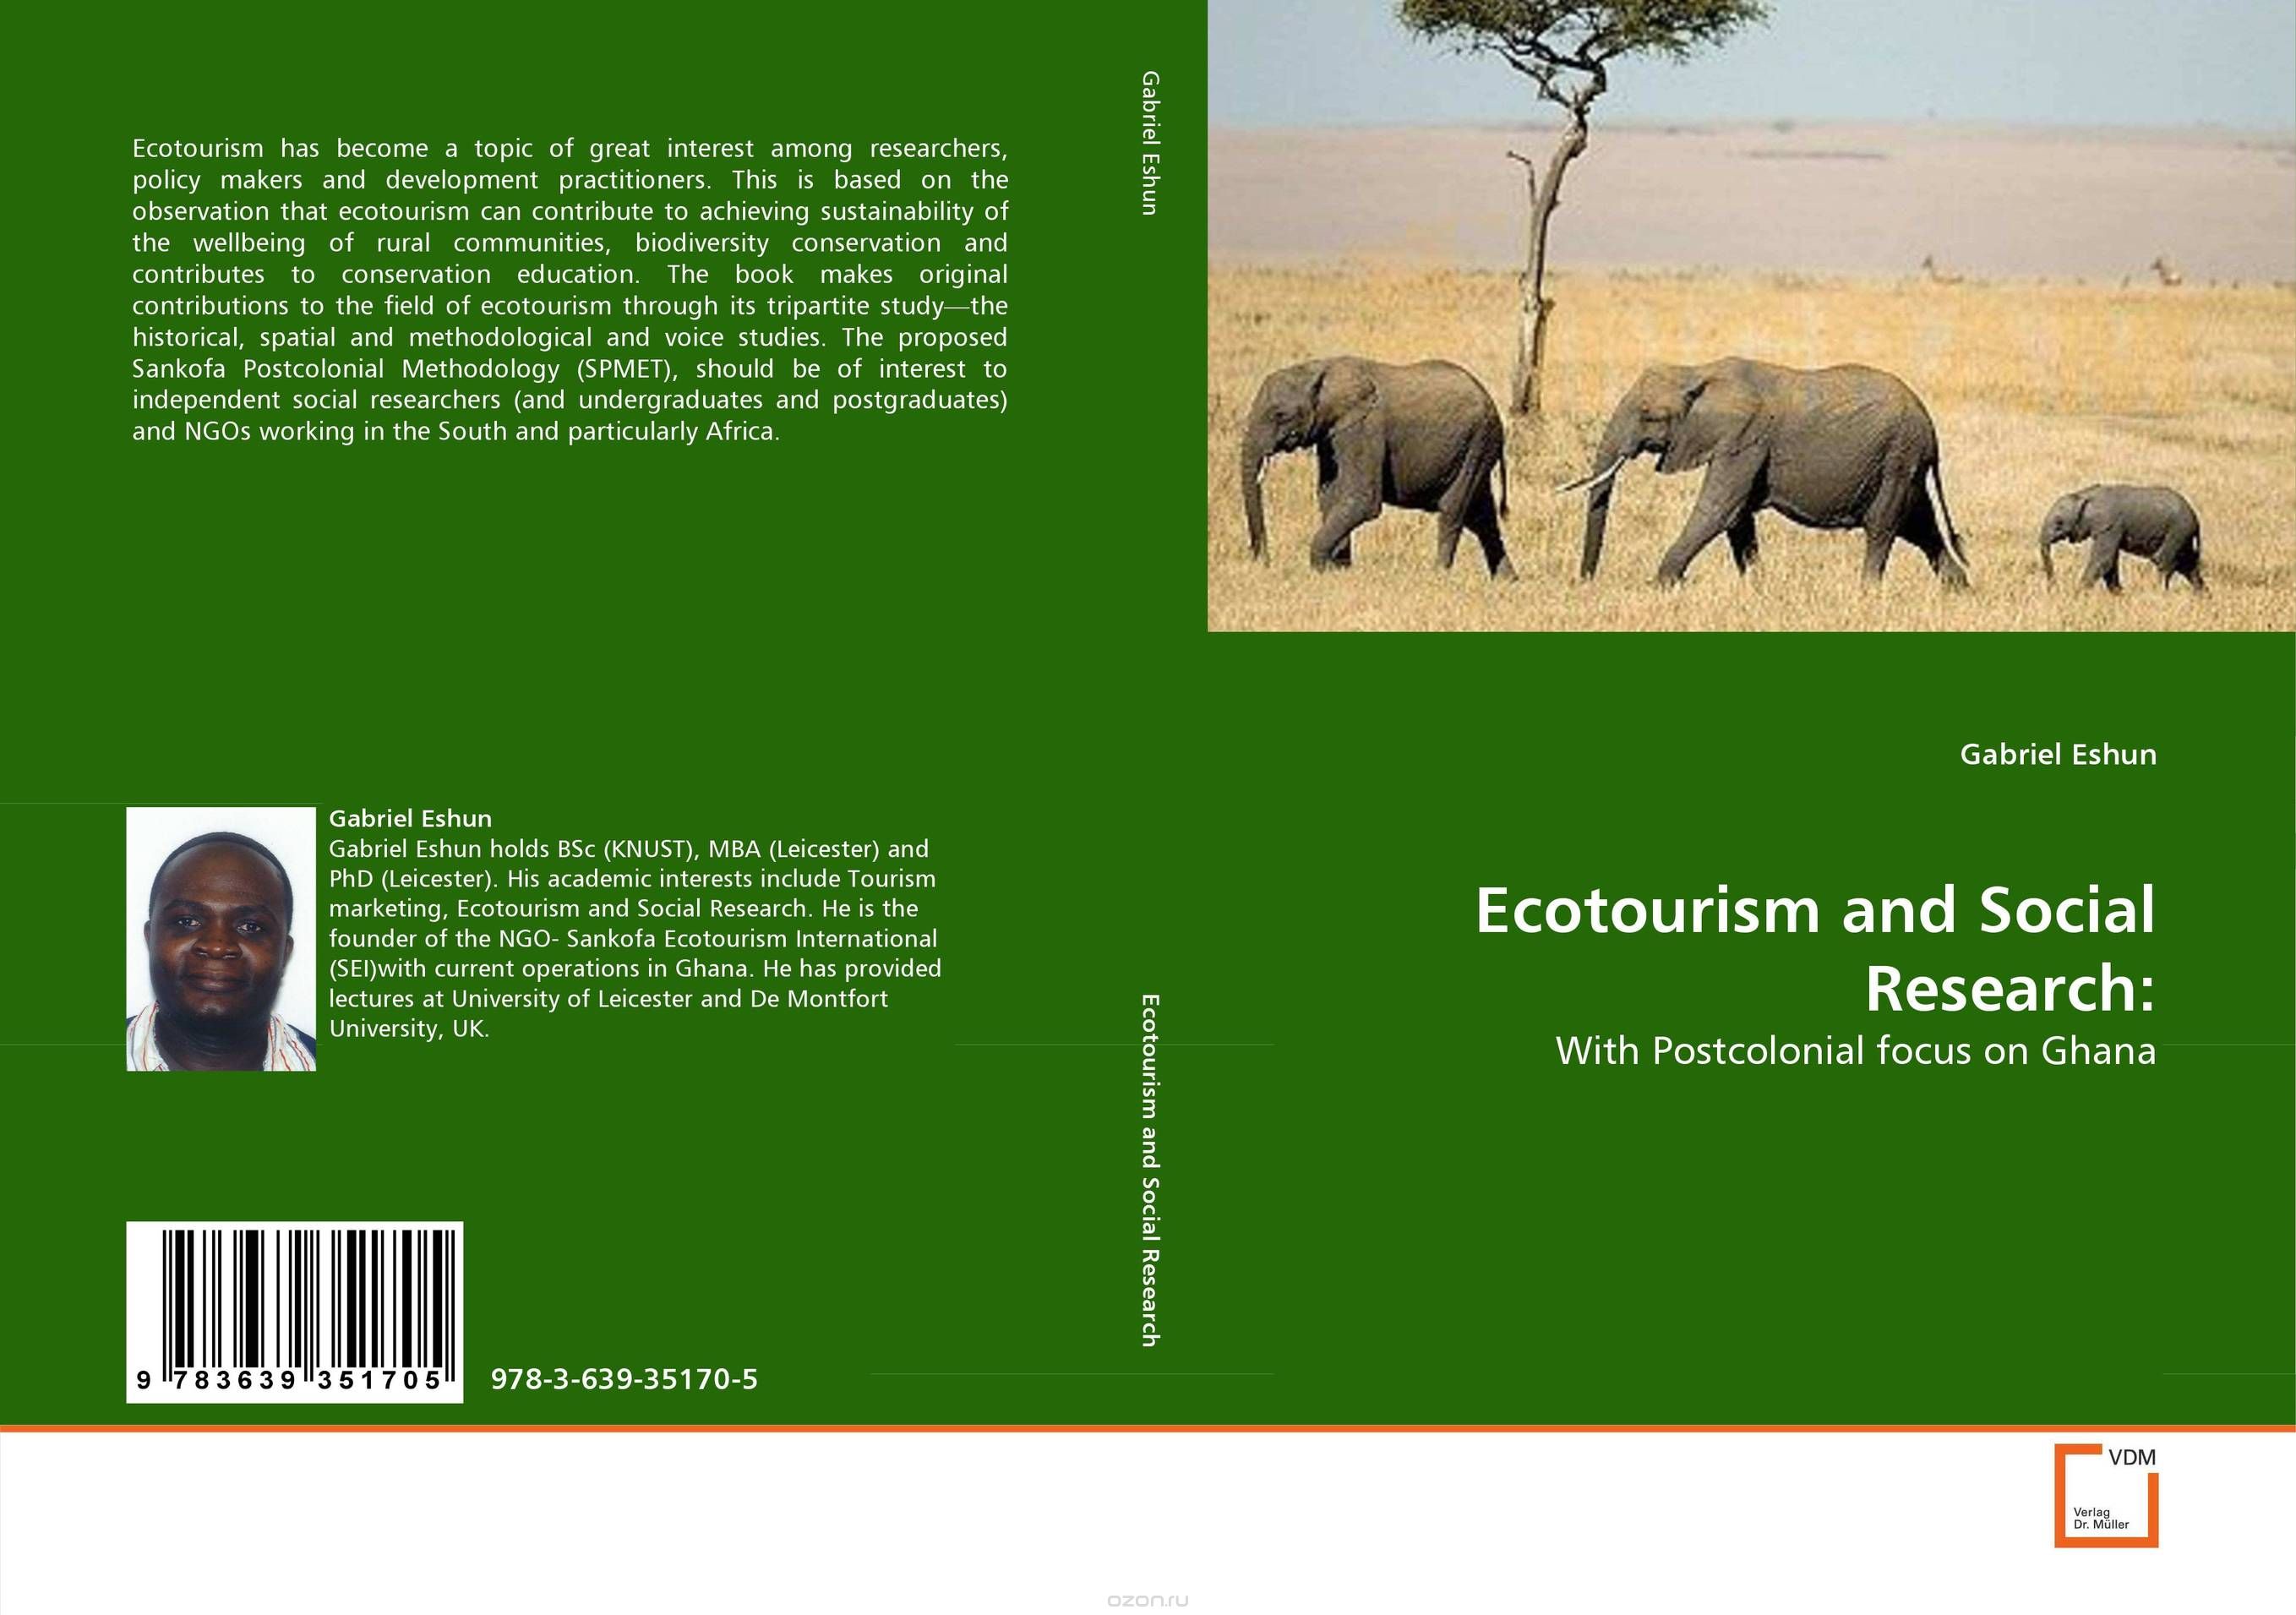 Ecotourism and Social Research: